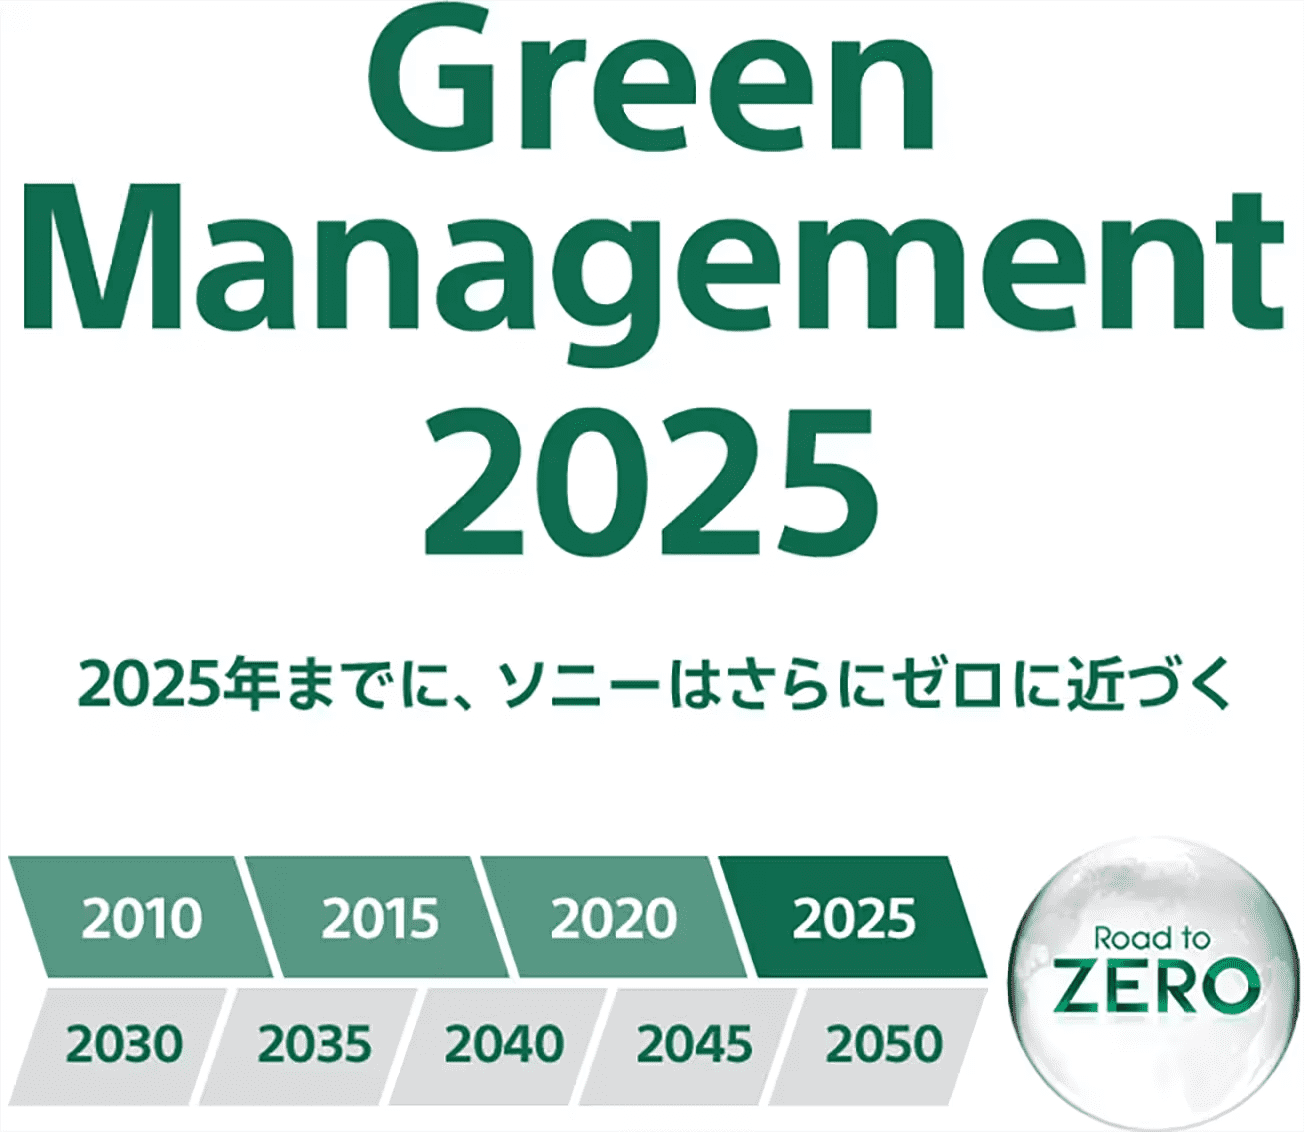 Green Management 2025 Sony - moving closer to zero with 2025 targets